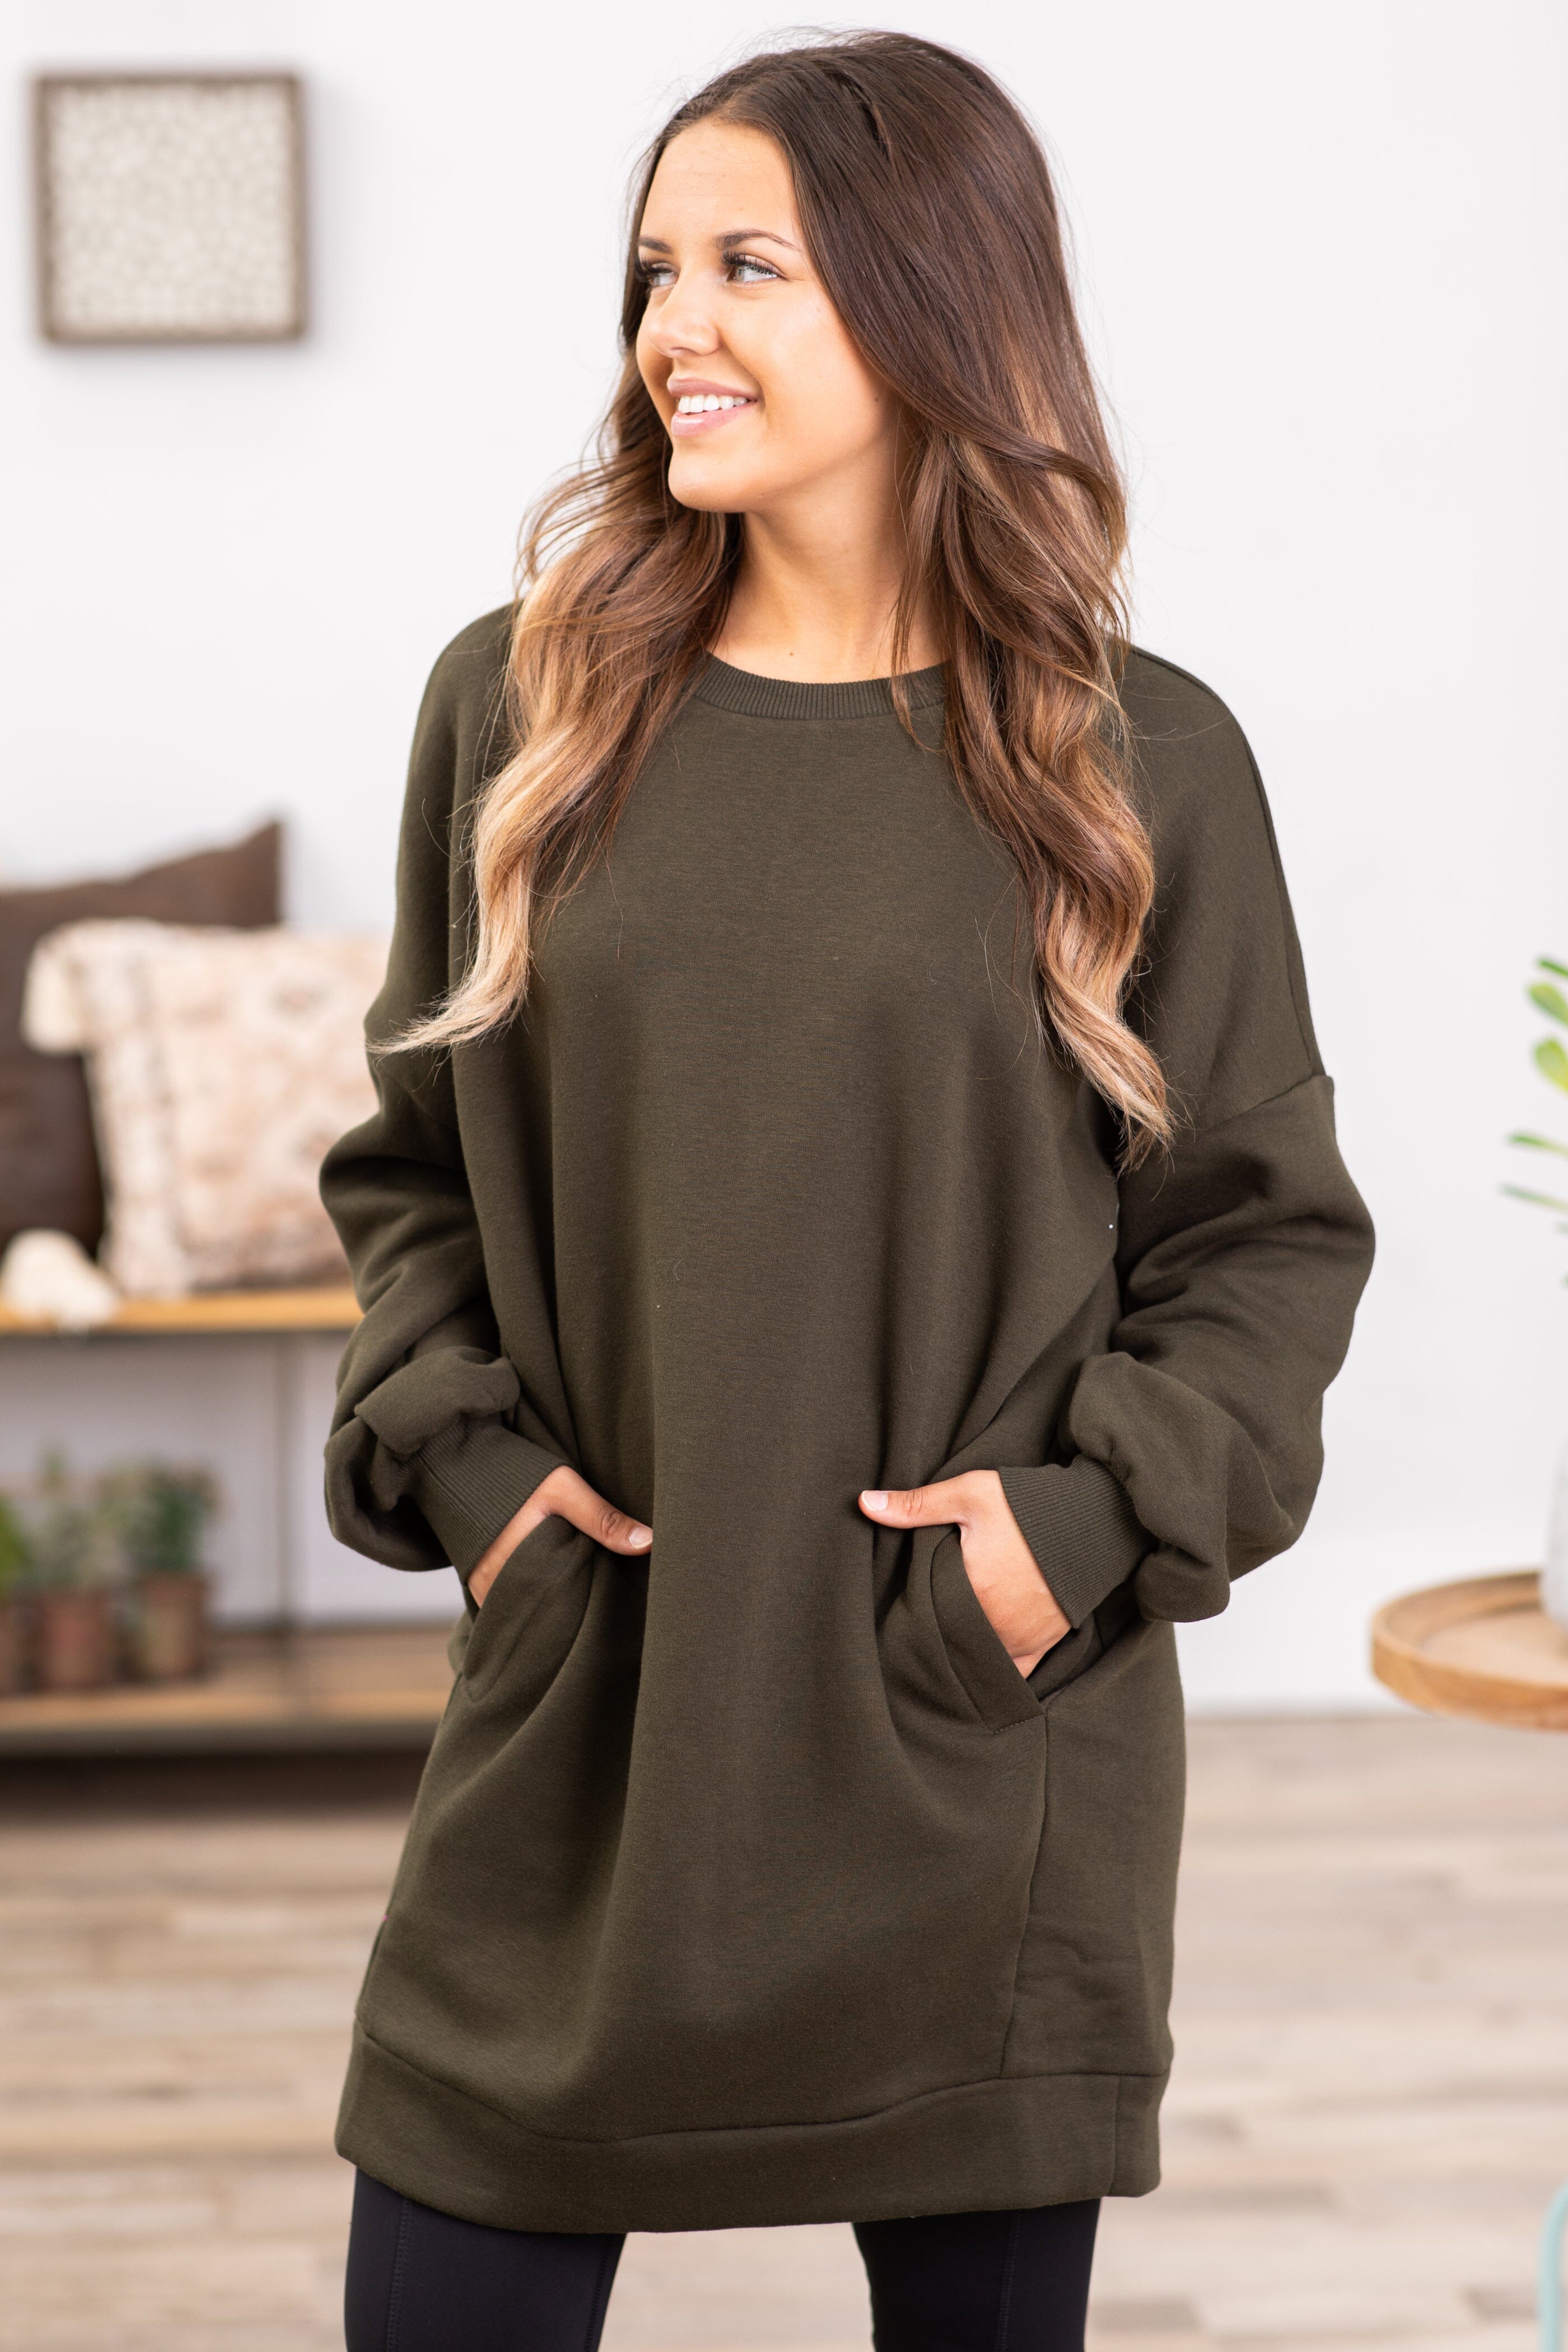 Olive Tunic Length Sweatshirt With Pockets - Filly Flair